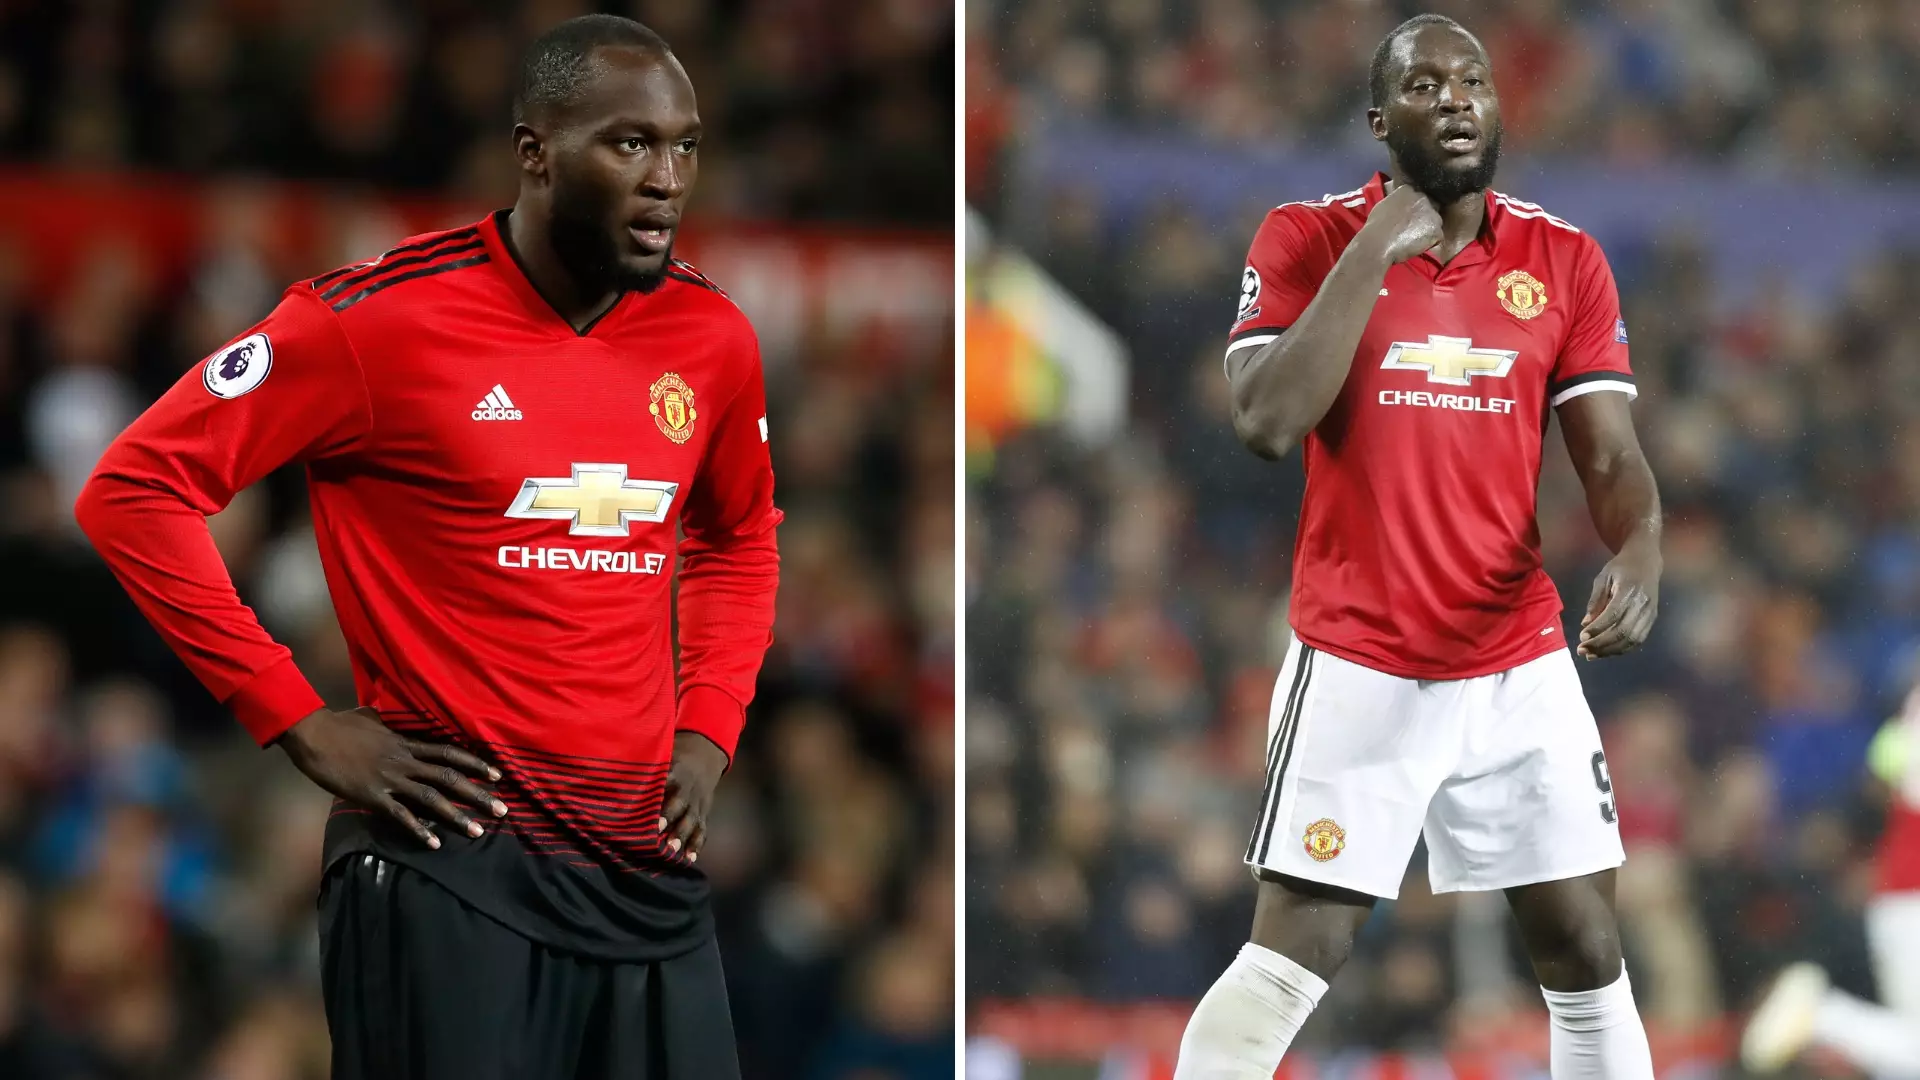 Romelu Lukaku Gives A Brilliant Response To Criticism About His Physique